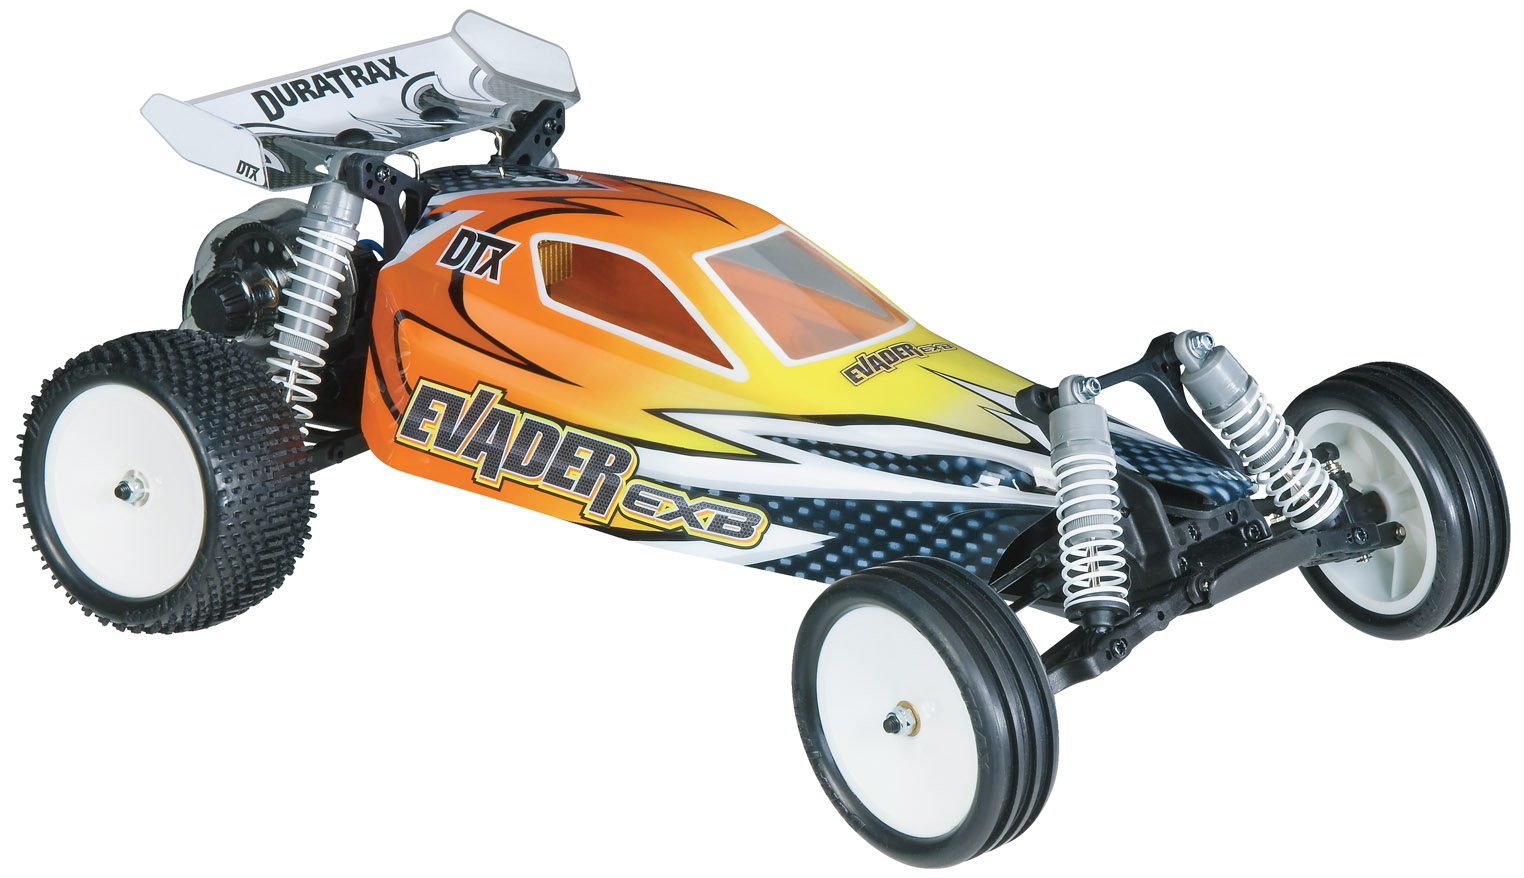 Duratrax Evader EXB 1/10-scale 2WD RTR 